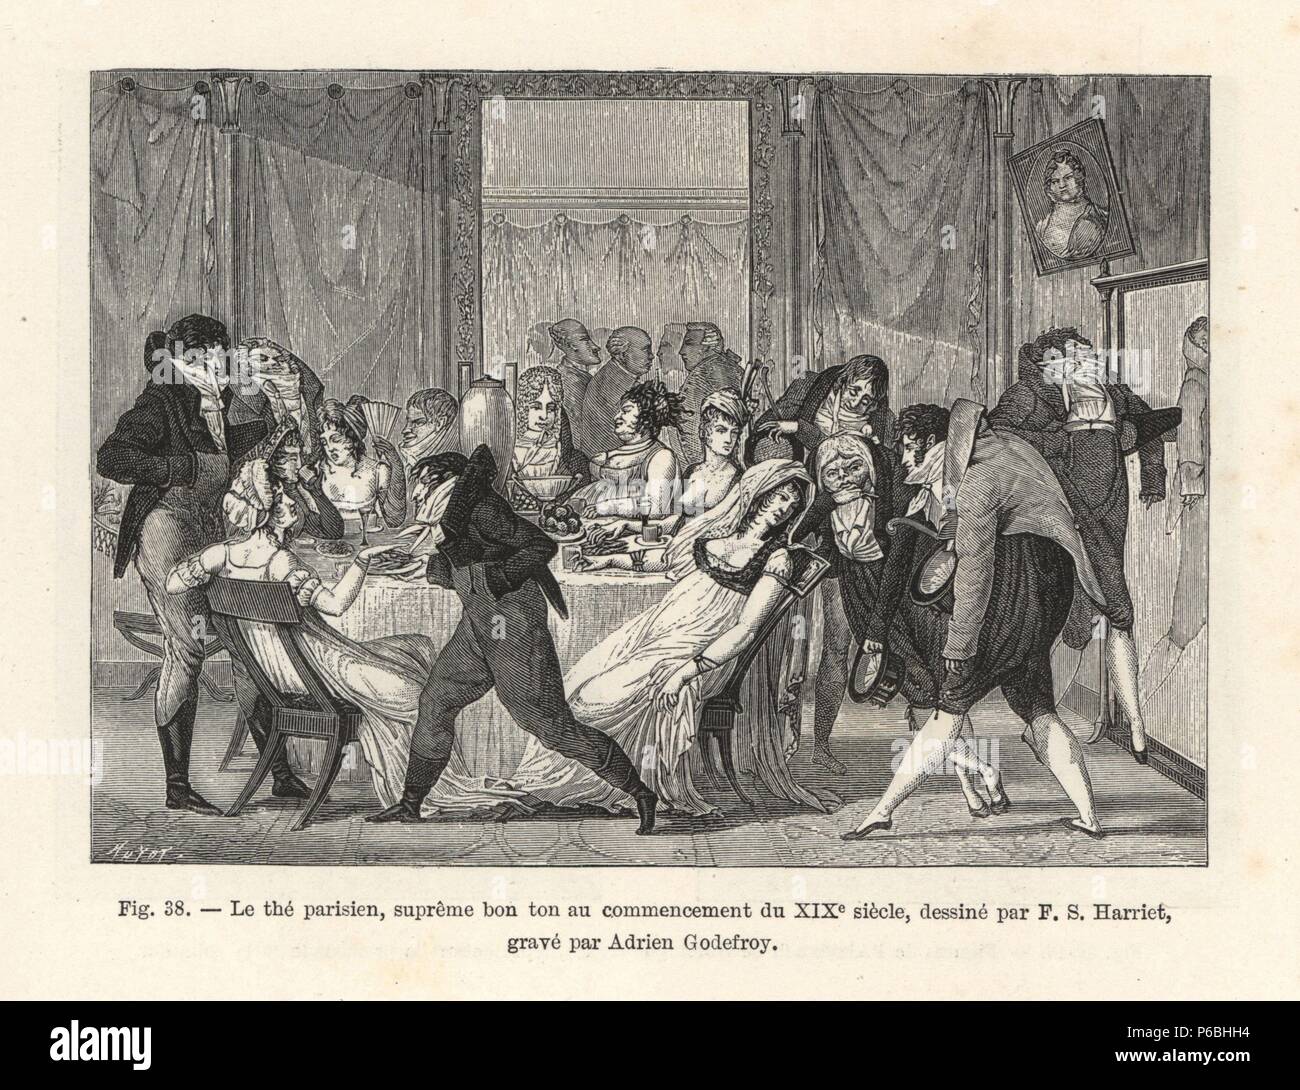 Parisian tea party, with Incroyables and Merveilleuses, the early 19th century. Drawn by F. S. Harriet, engraved by Godefroy, woodcut by Huyot from Paul Lacroix's 'Directoire, Consulat et Empire,' Paris, 1884. Stock Photo